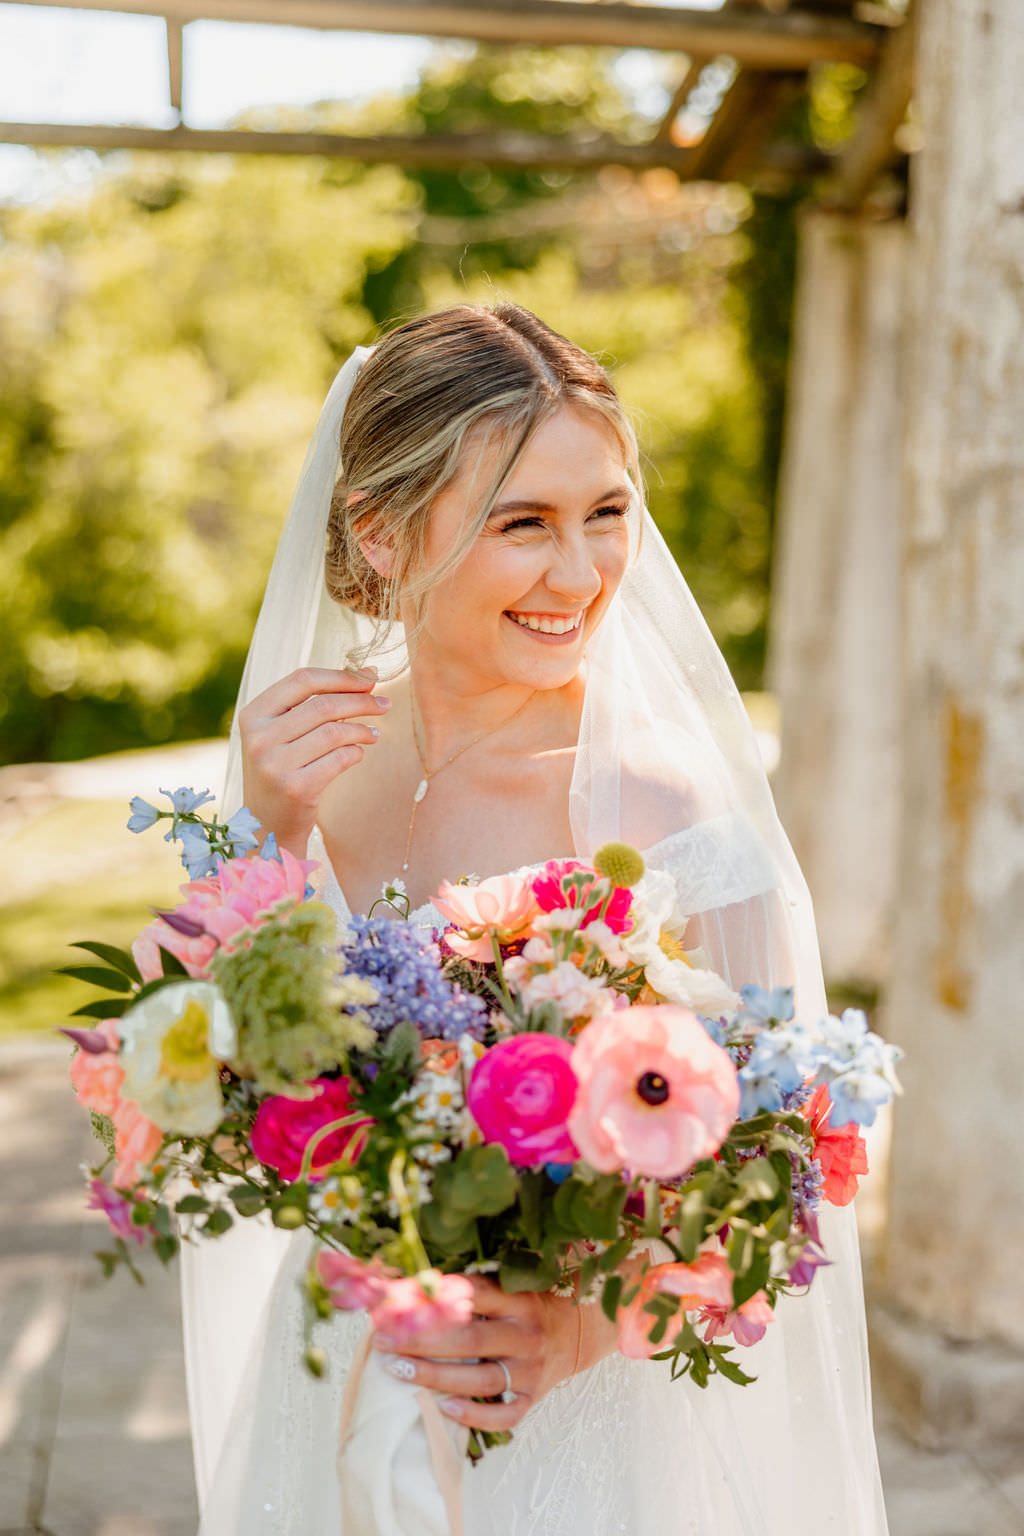 Bride smiling holding her bouquet at central PA wedding venue